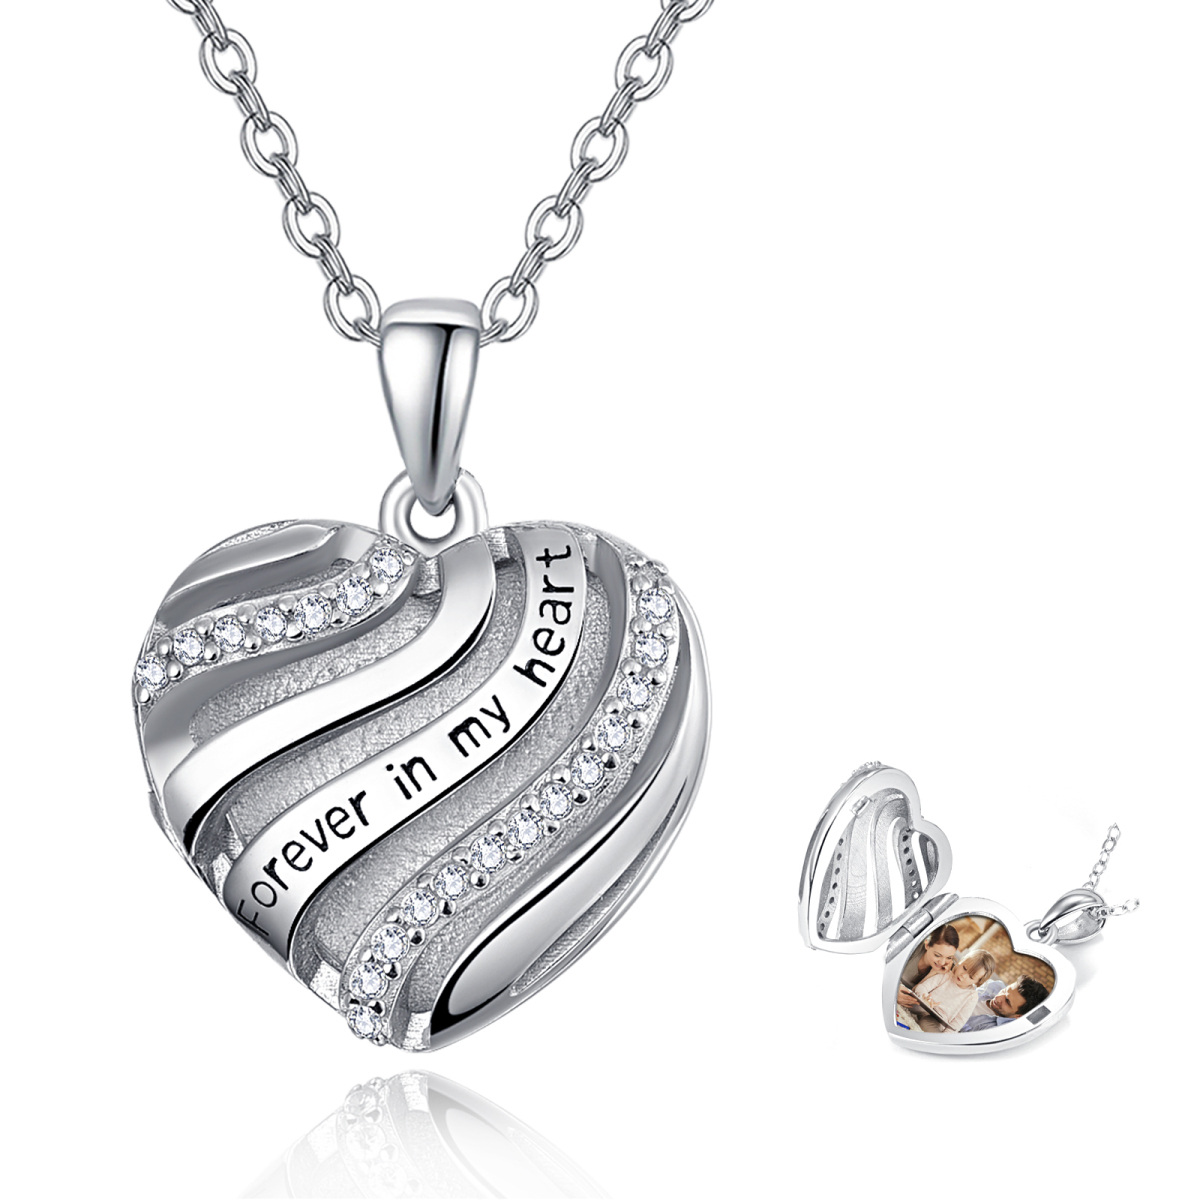 Sterling Silver Circular Shaped Cubic Zirconia Personalized Photo & Heart Personalized Photo Locket Necklace with Engraved Word-1